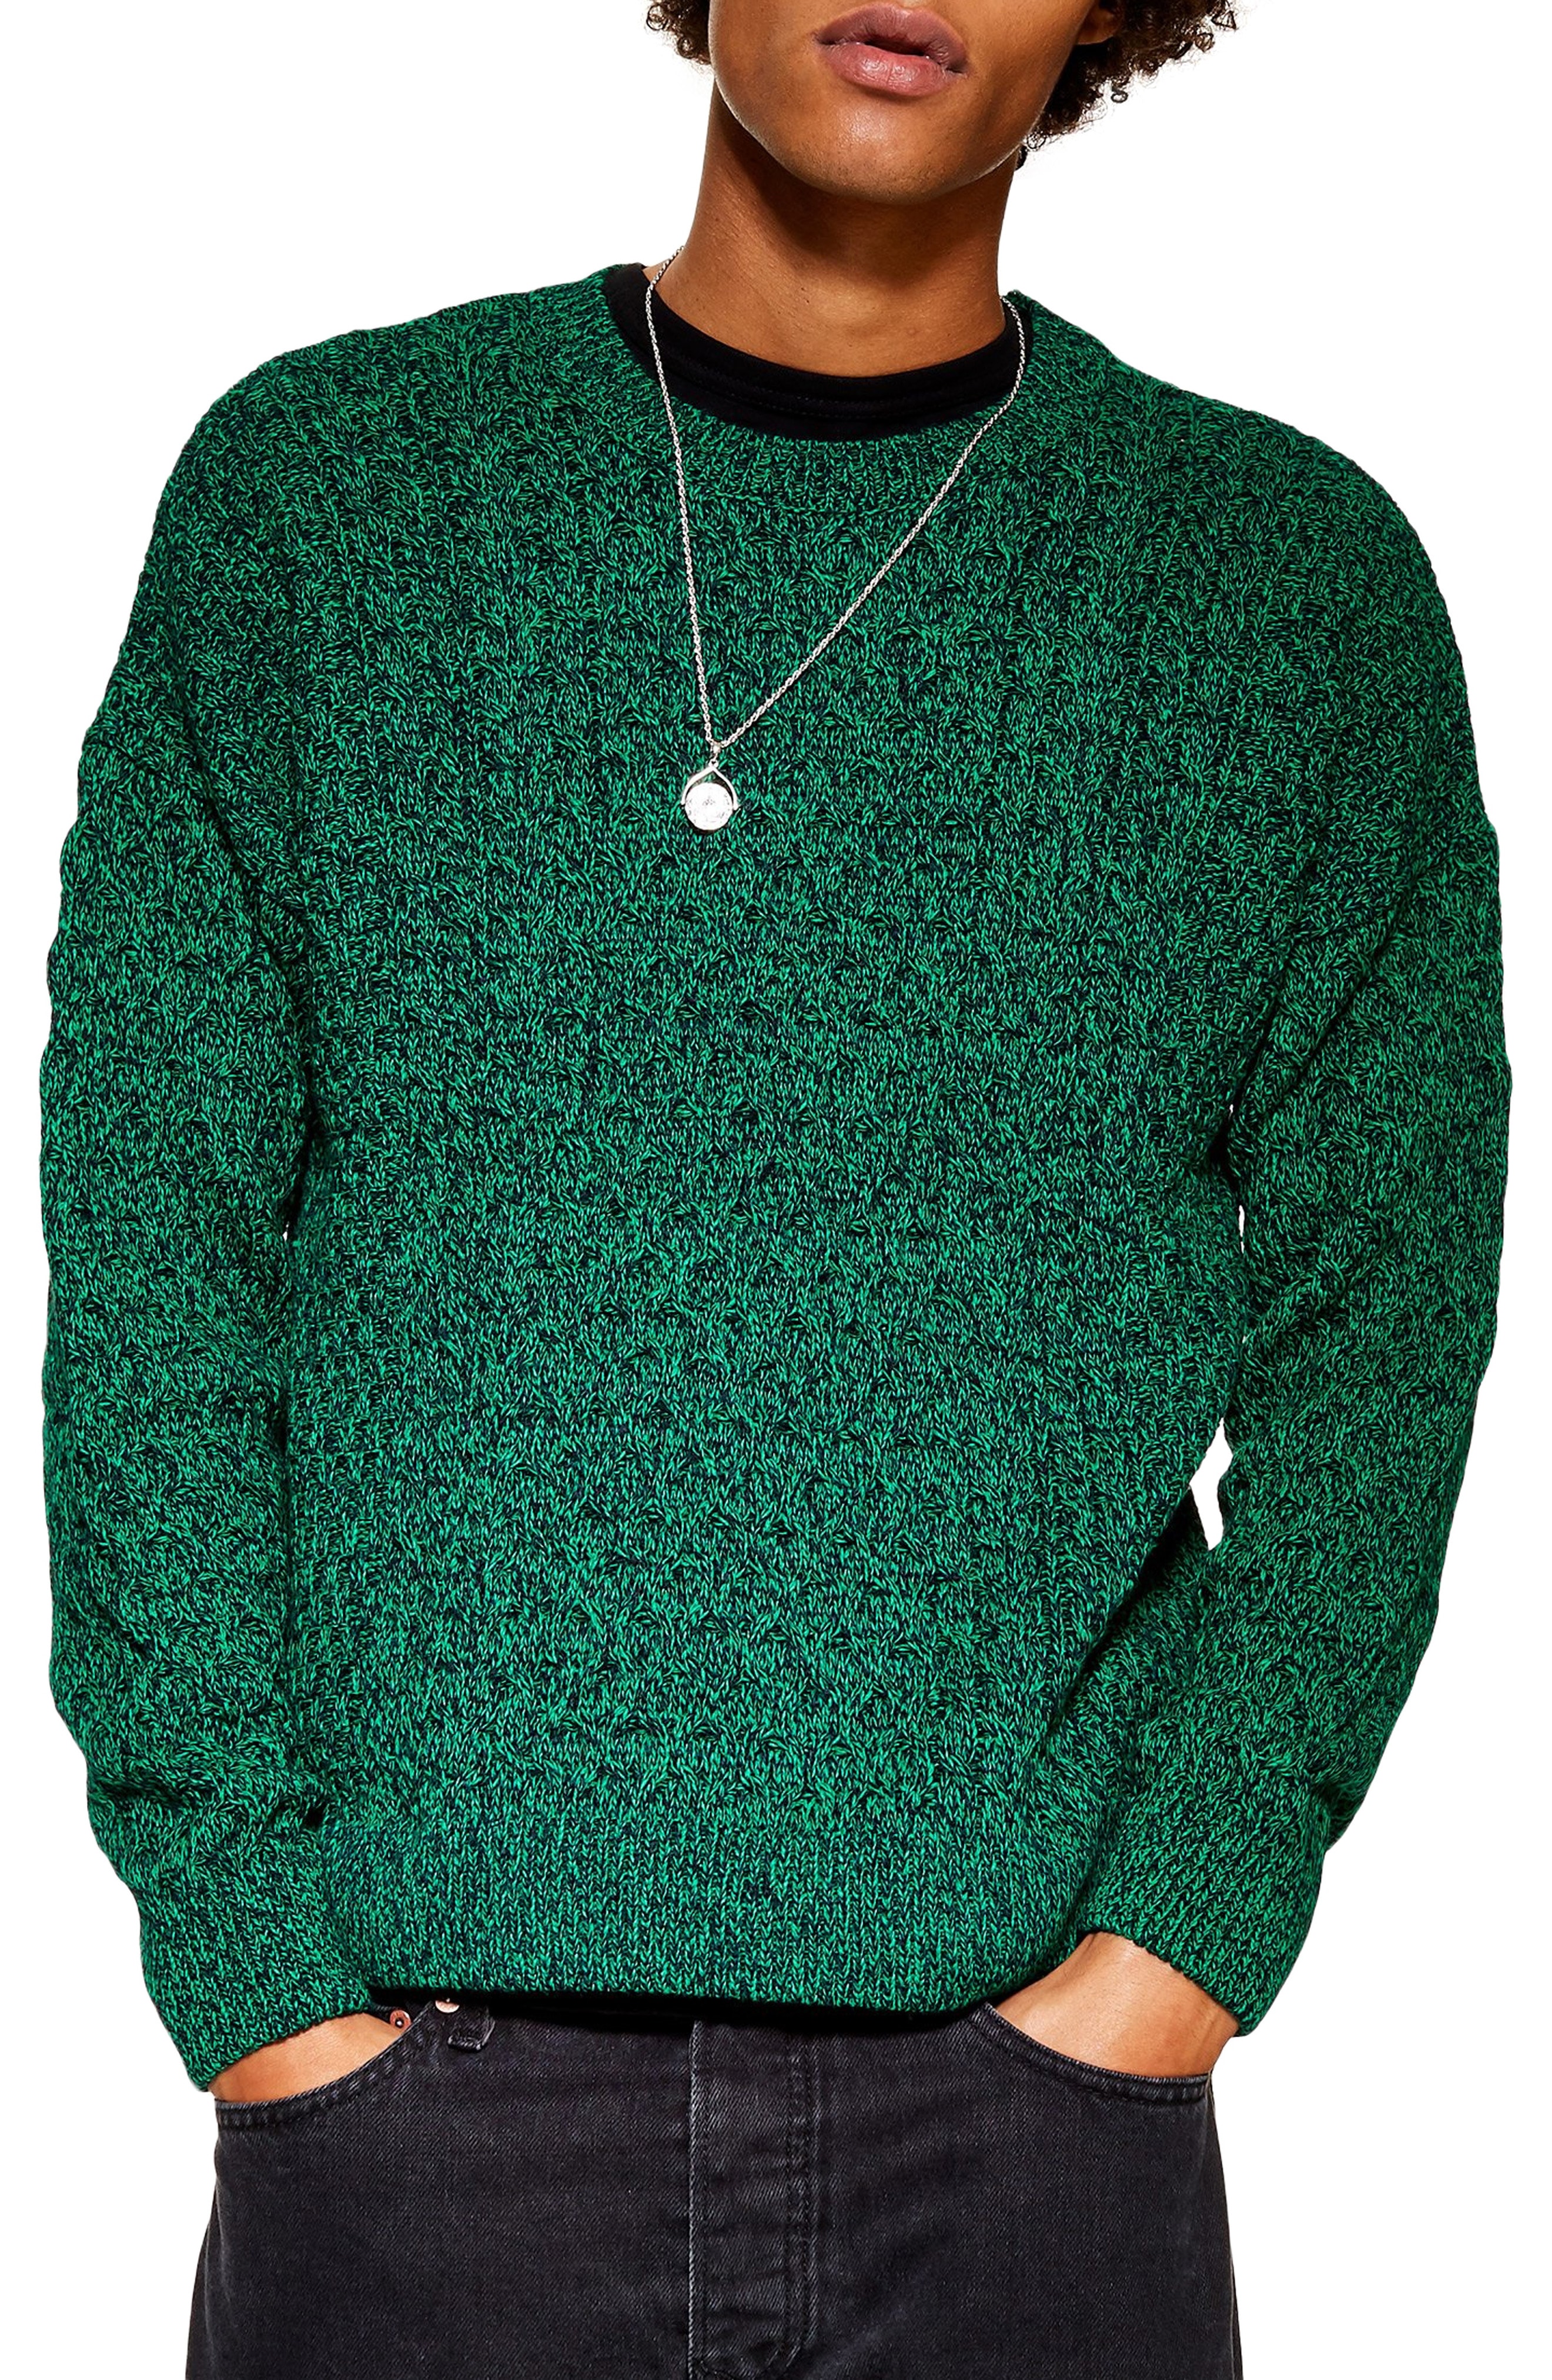 Men S Topman Marl Cable Knit Sweater Size Small Green The Fashionisto